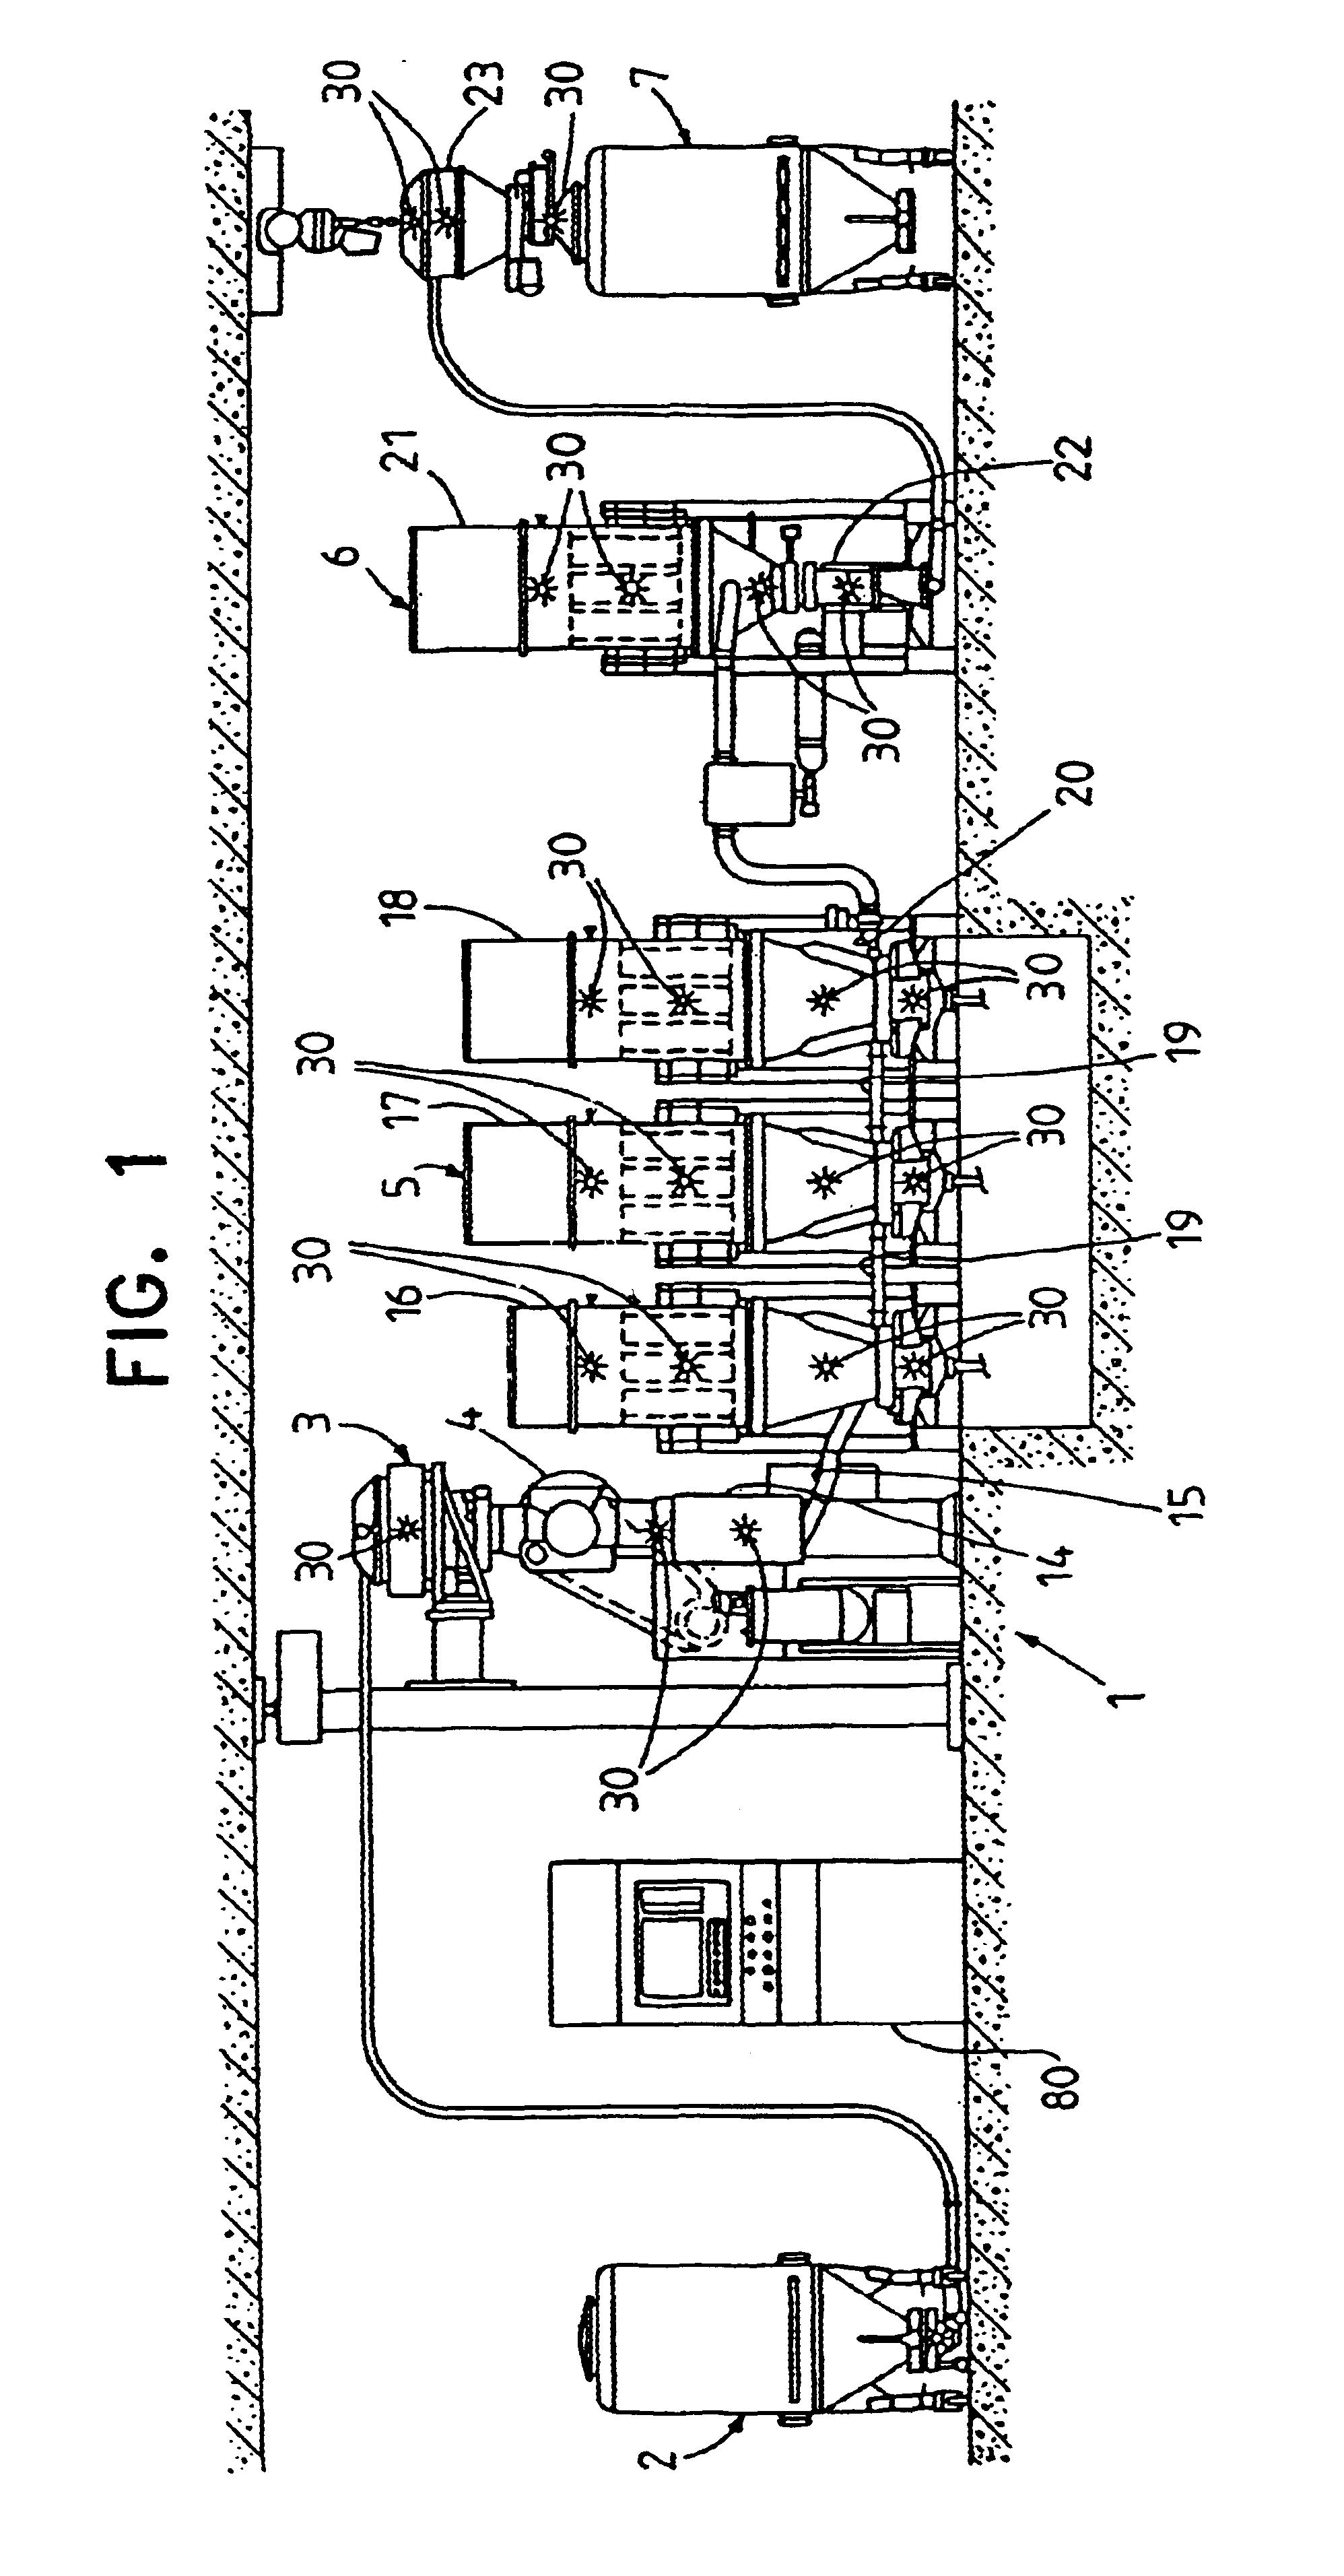 Quasi-continuous treatment of particulate materials with cleansing nozzle system